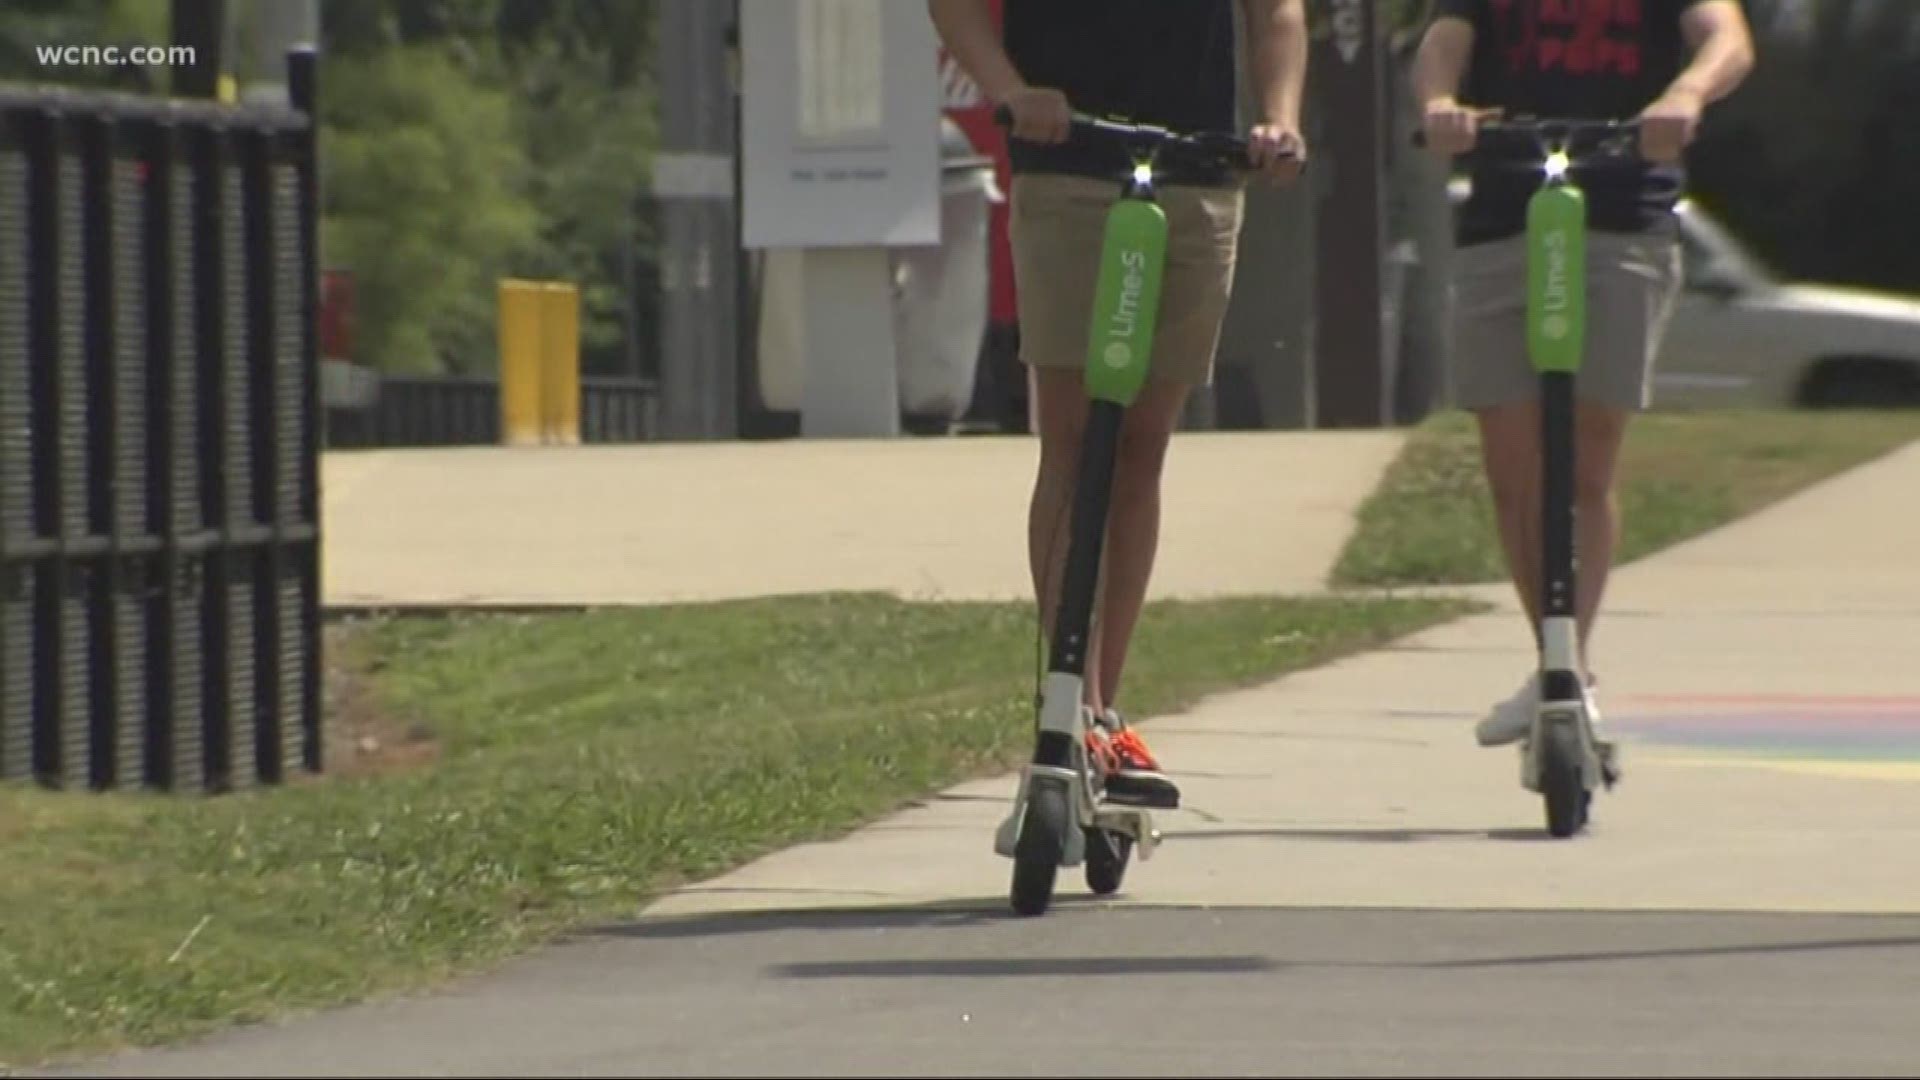 The new rules include a speed cap at 15 mph and a ban on two people riding the same scooter at the same time.